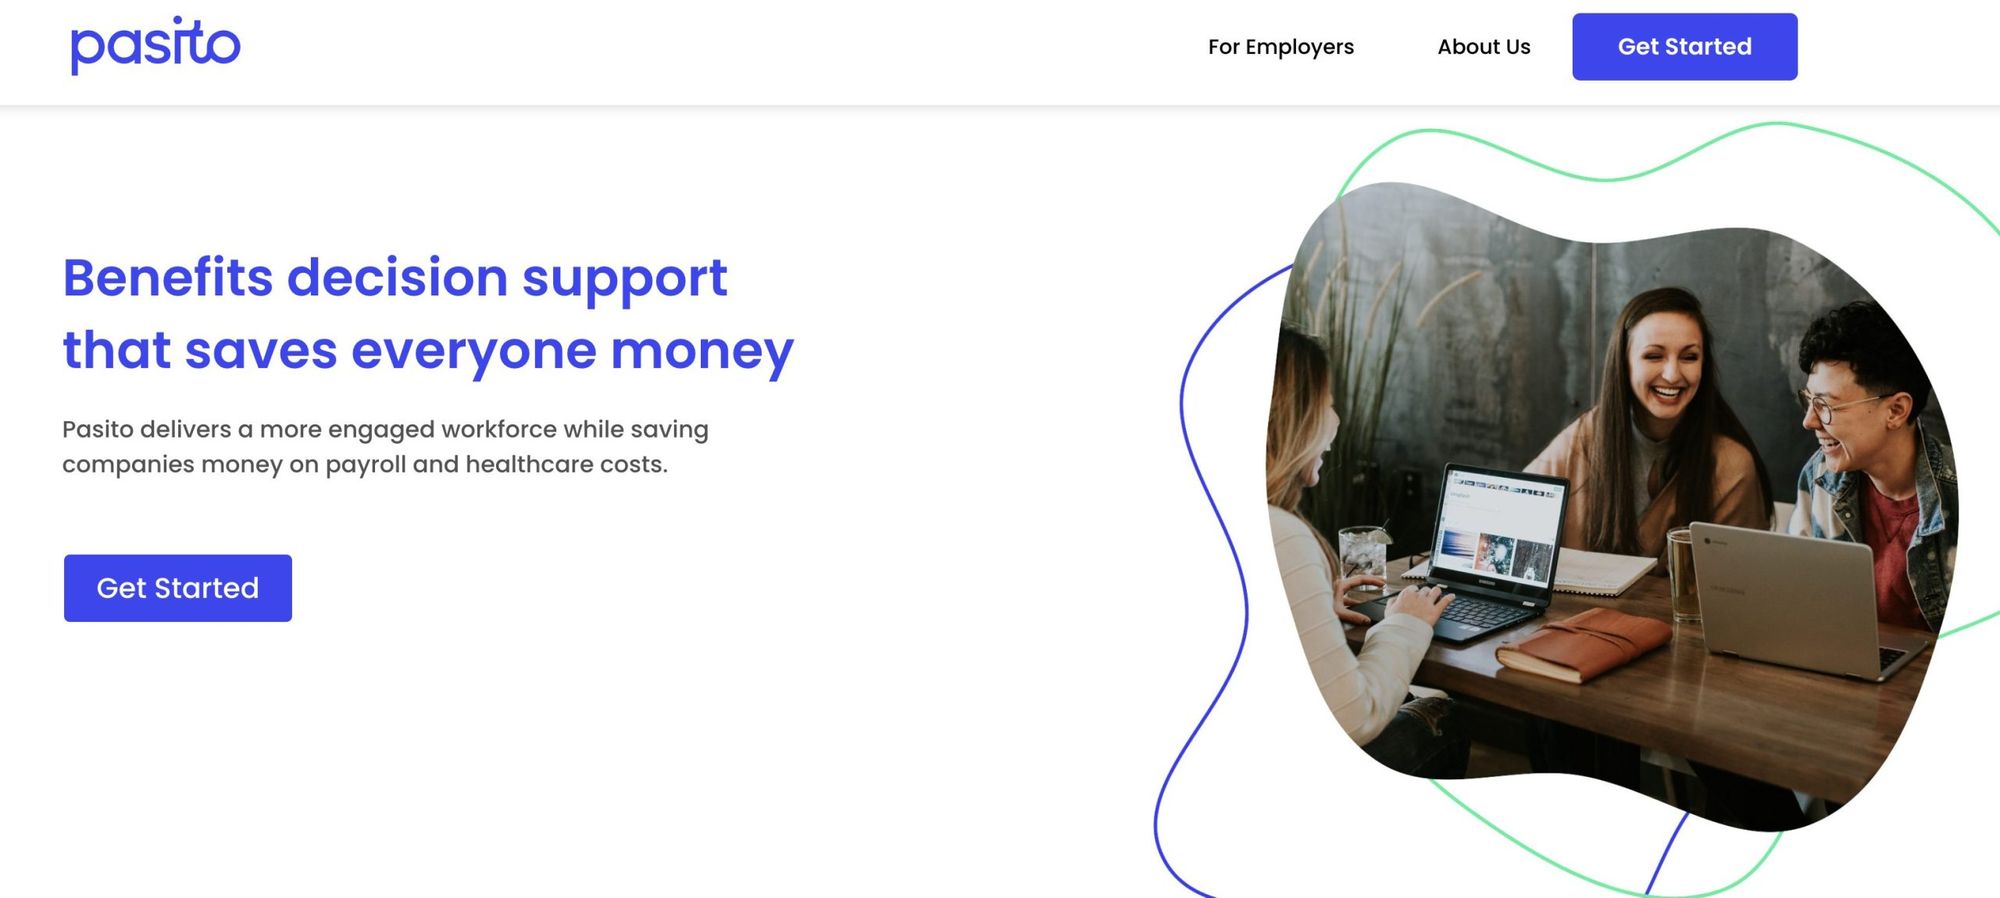 Pasito - Saving companies and employees money on healthcare and payroll